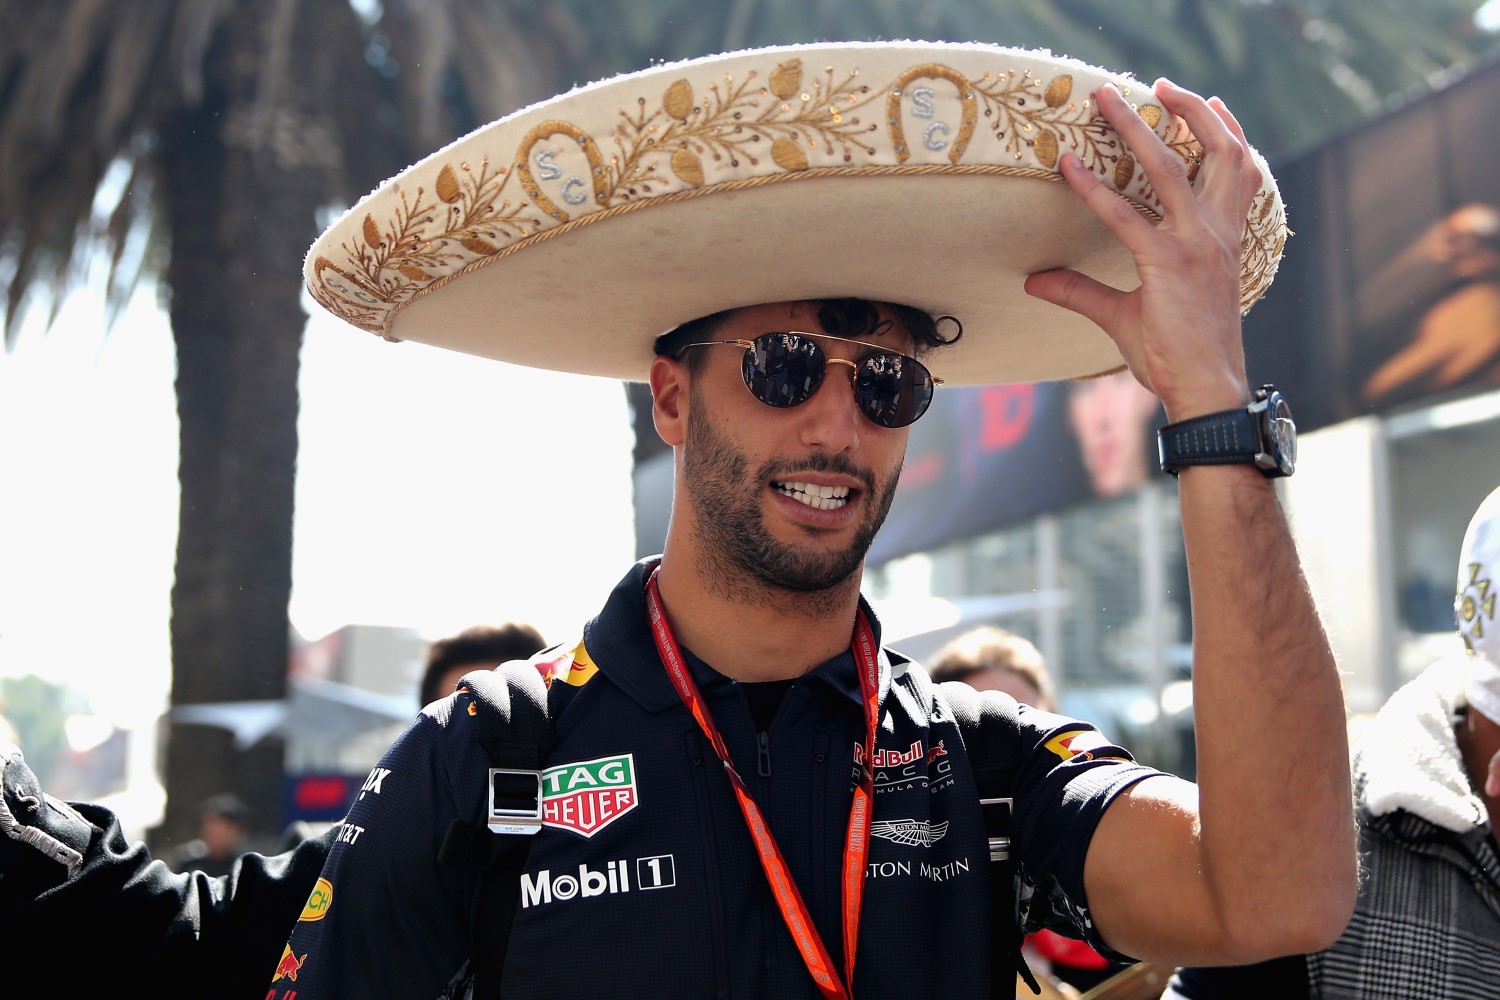 Red Bull wants to hang on to the talented Italian Ricciardo who has citizenship in Australia